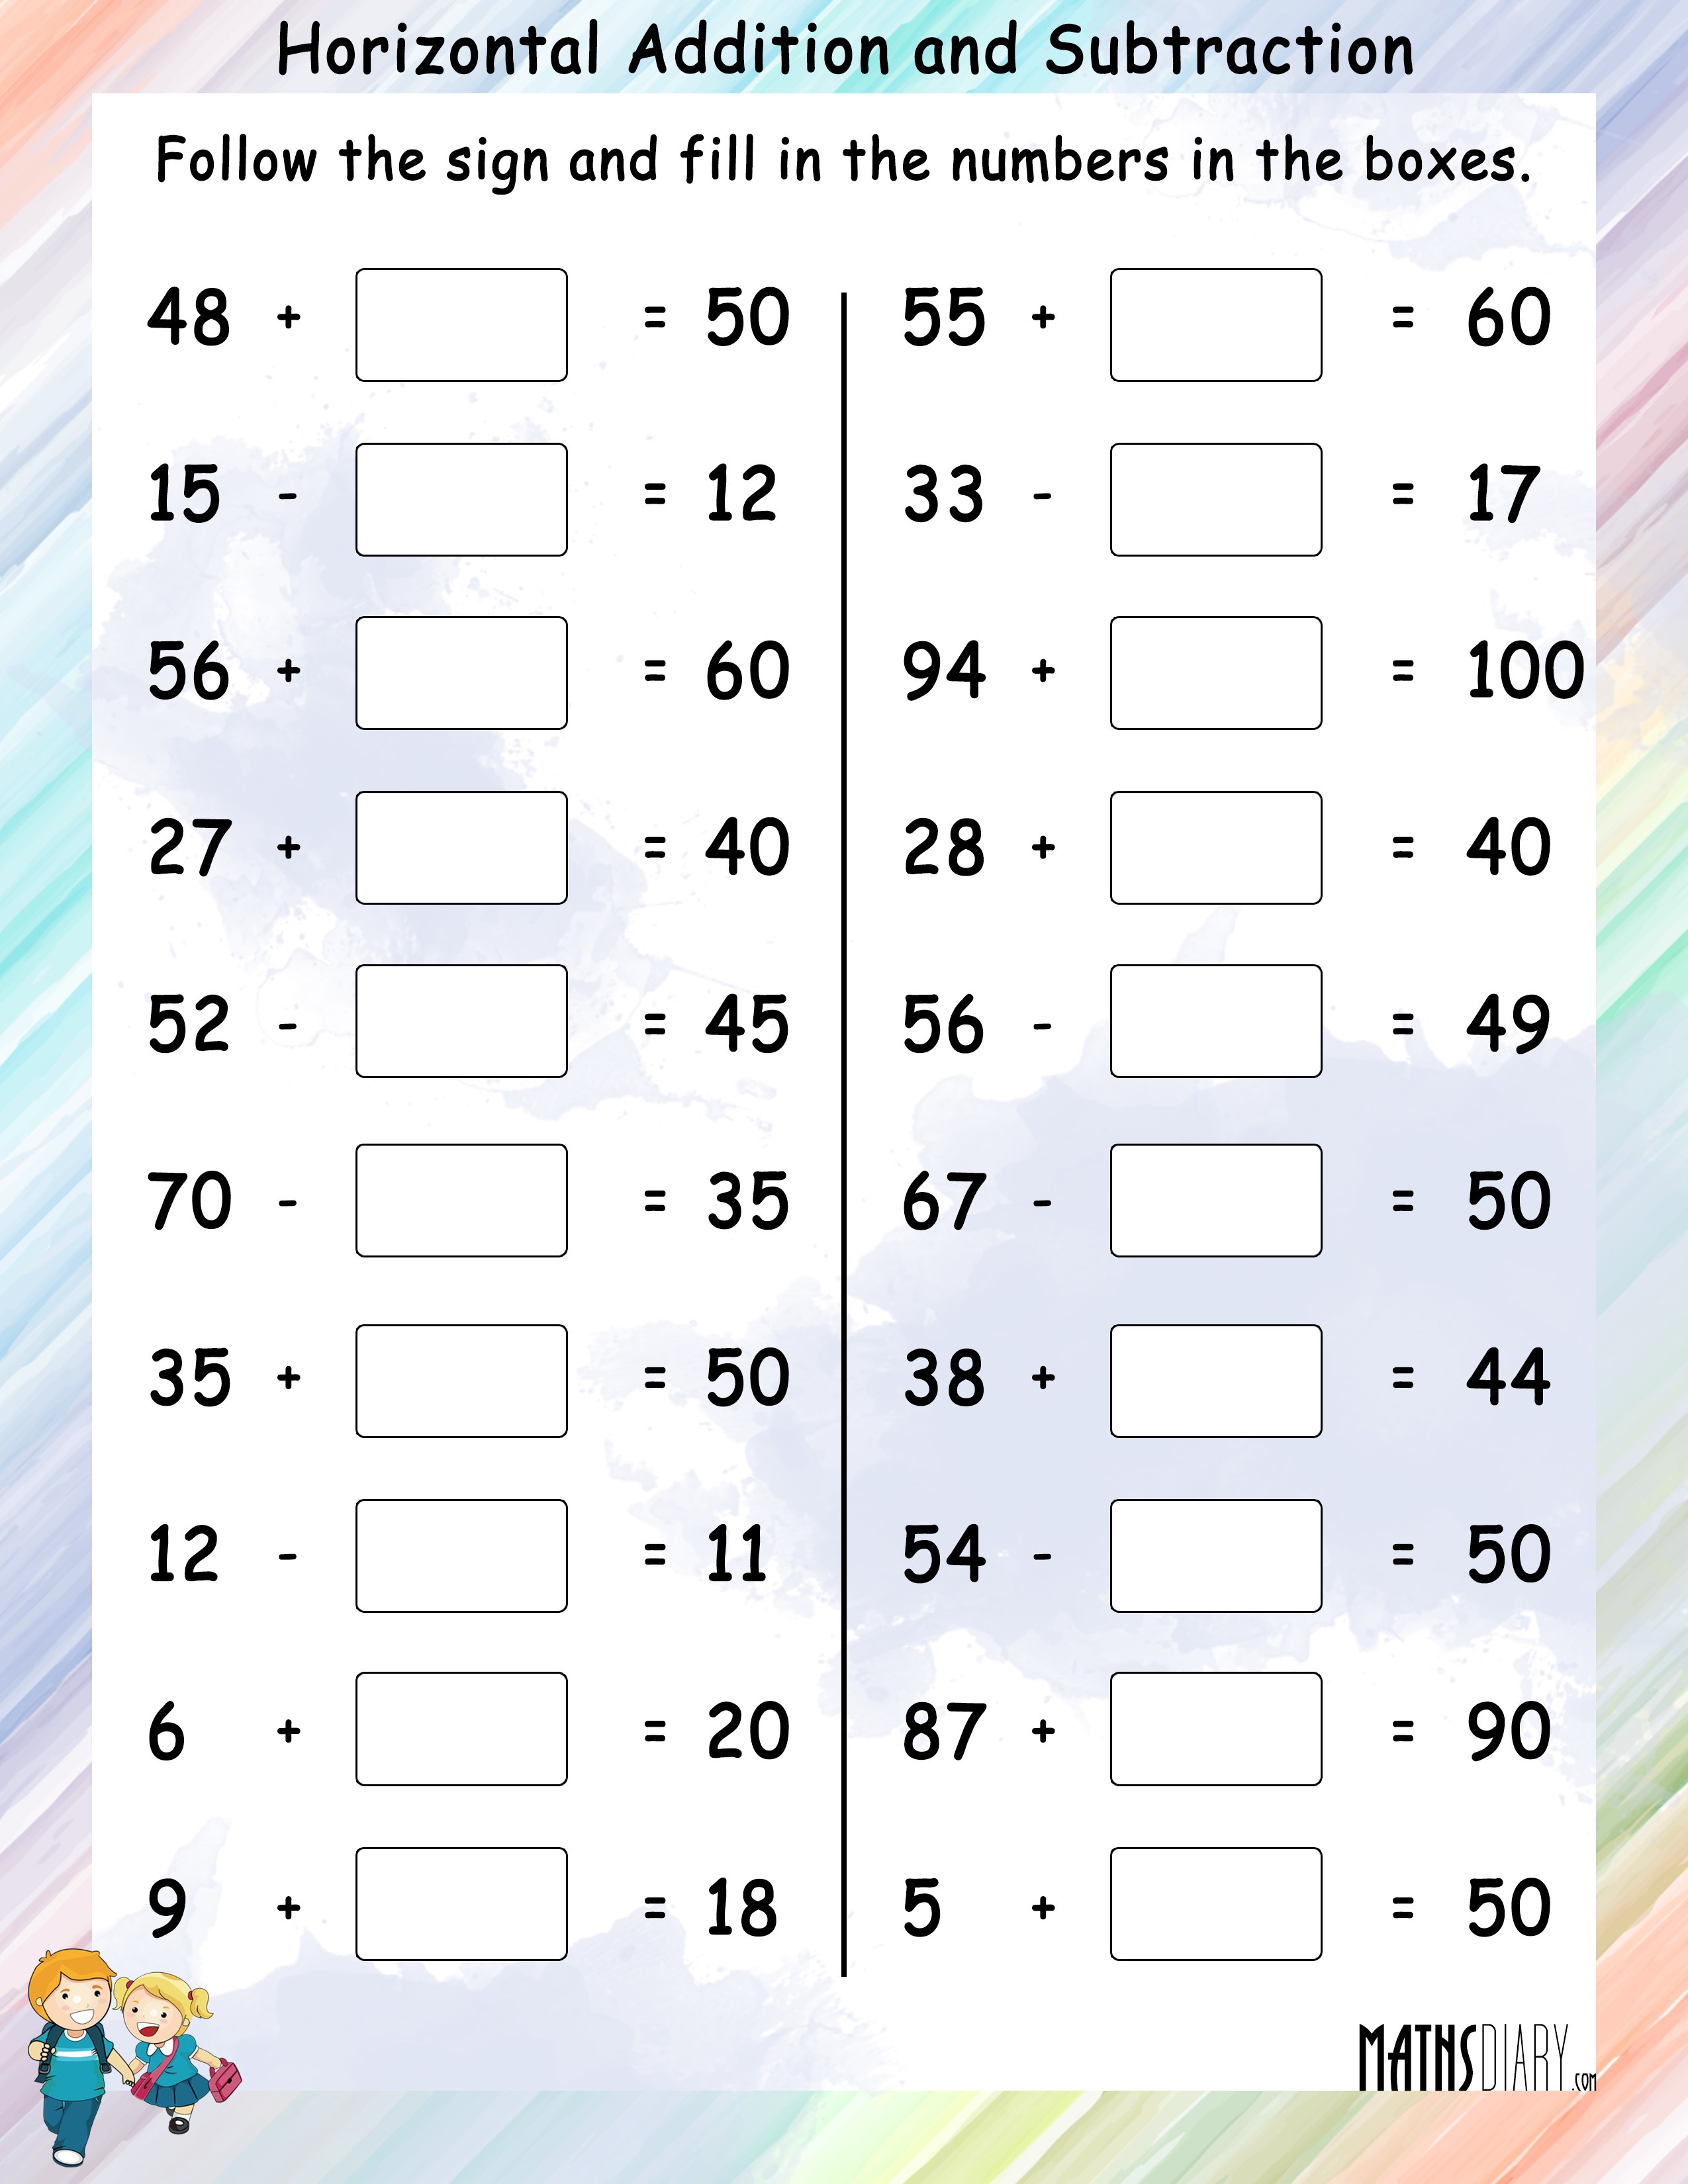 Horizontal Addition and Subtraction - Math Worksheets - MathsDiary.com